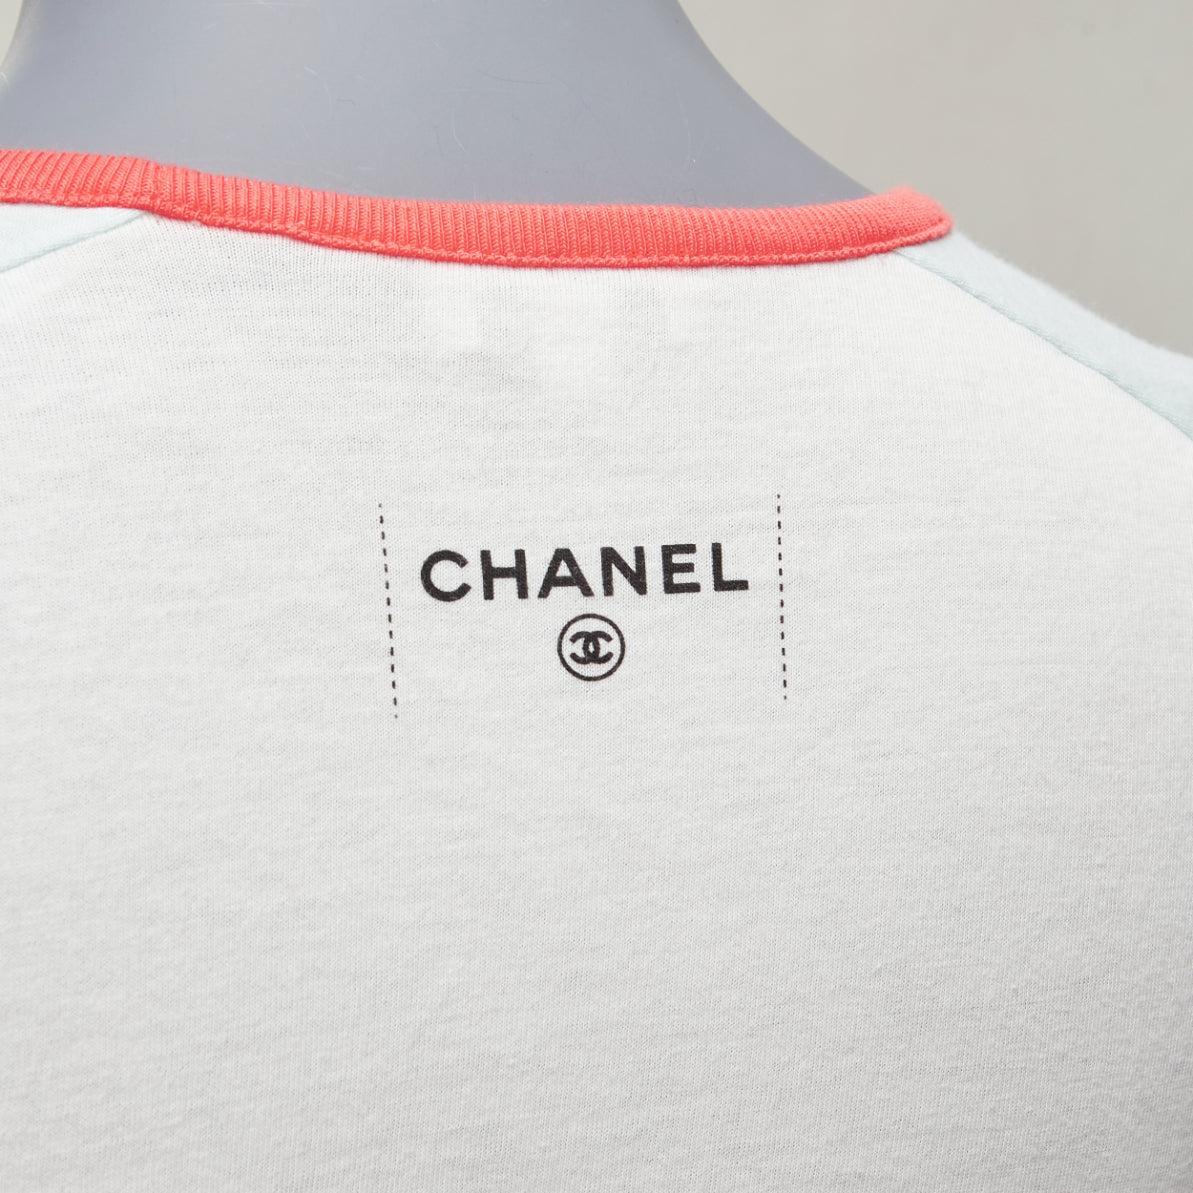 CHANEL 2017 Viva Coco Cuba logo print cotton ringer tshirt XS
Reference: AAWC/A01138
Brand: Chanel
Designer: Karl Lagerfeld
Collection: 2017 Cruise
Material: Feels like cotton
Color: Multicolour
Pattern: Solid
Closure: Pullover
Extra Details: Ribbed